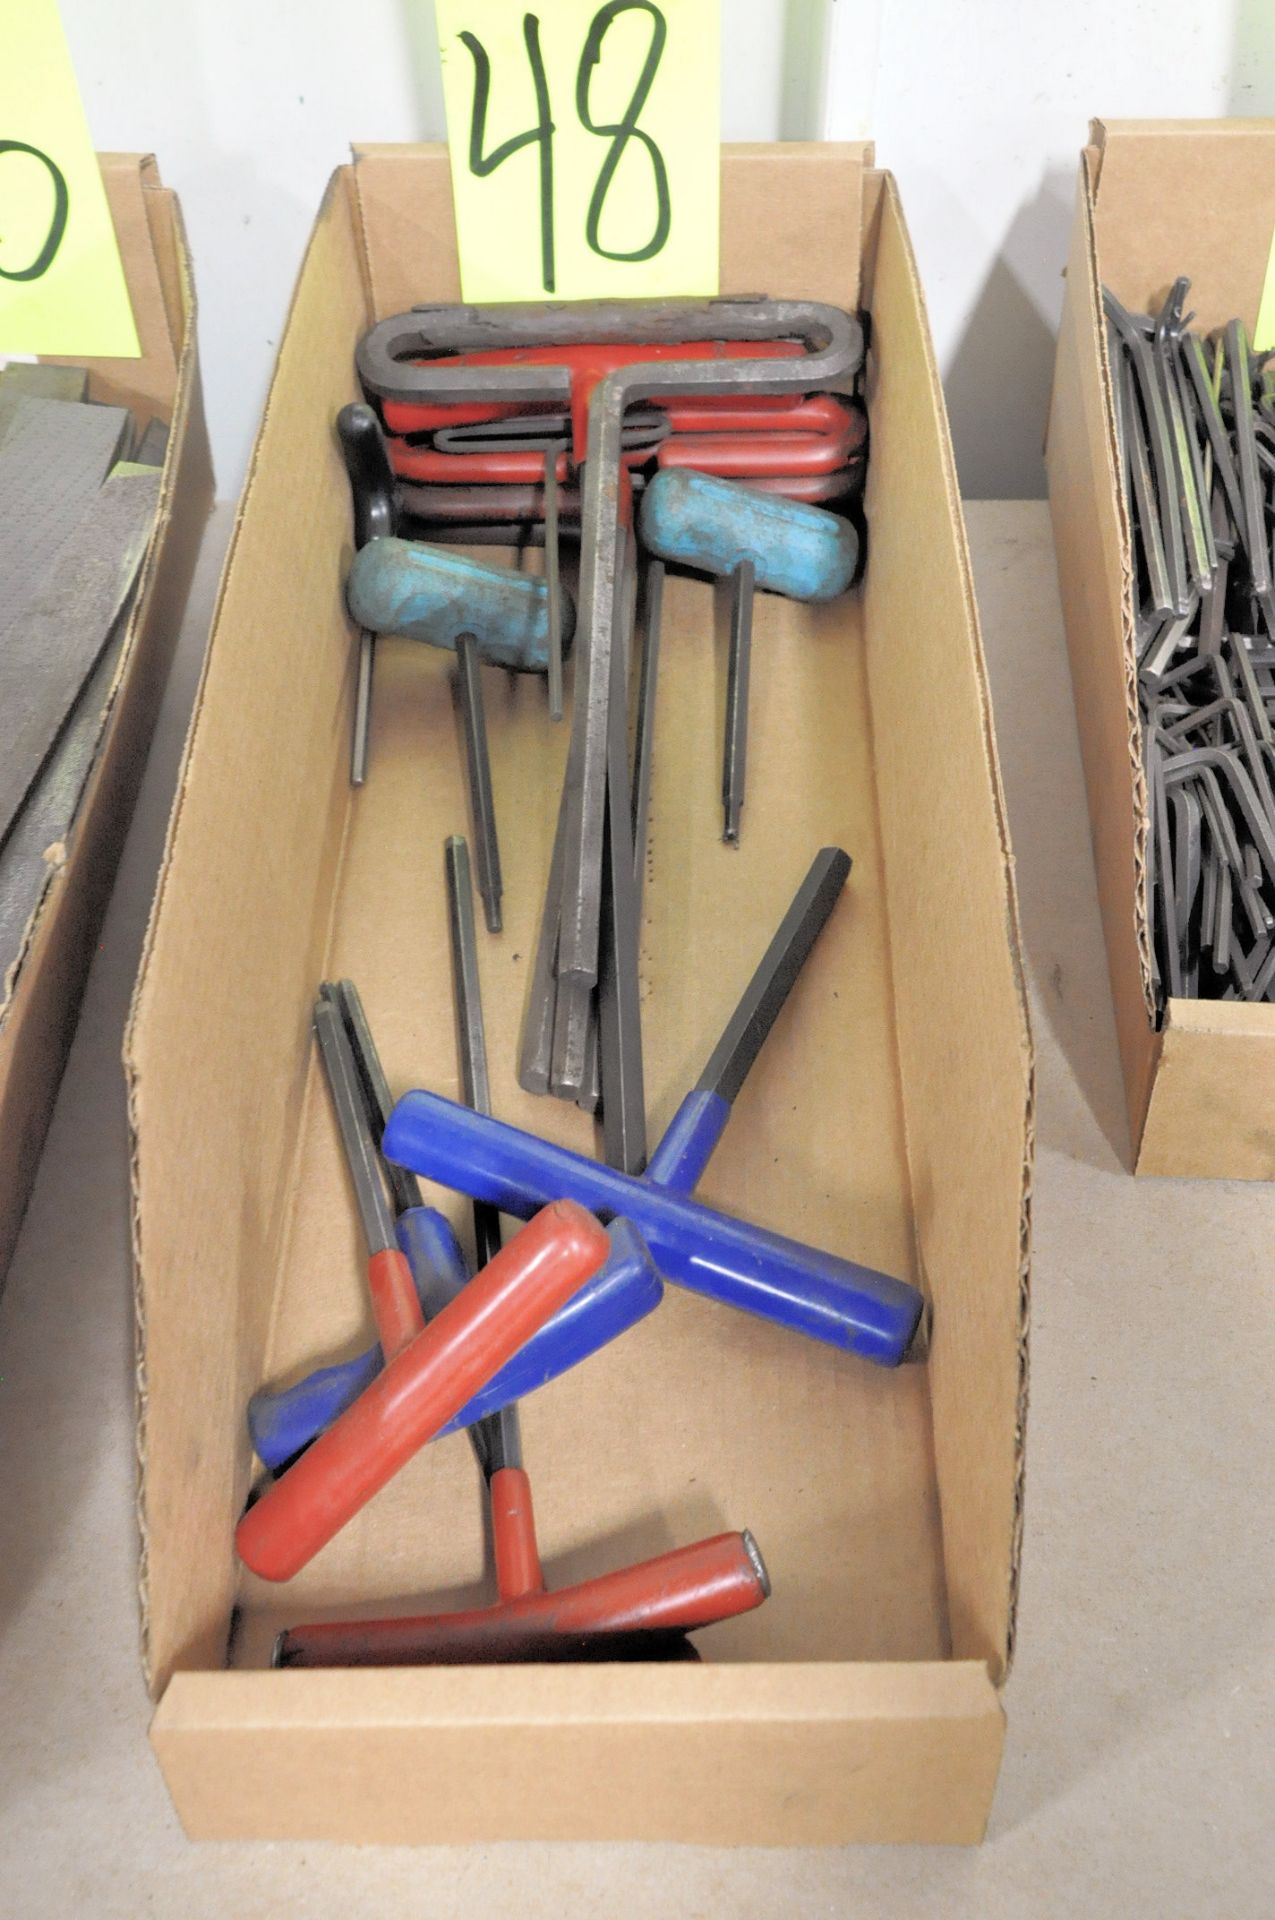 Lot-T Handle Allen Wrenches and Small Allen Wrenches in (3) Boxes - Image 3 of 3